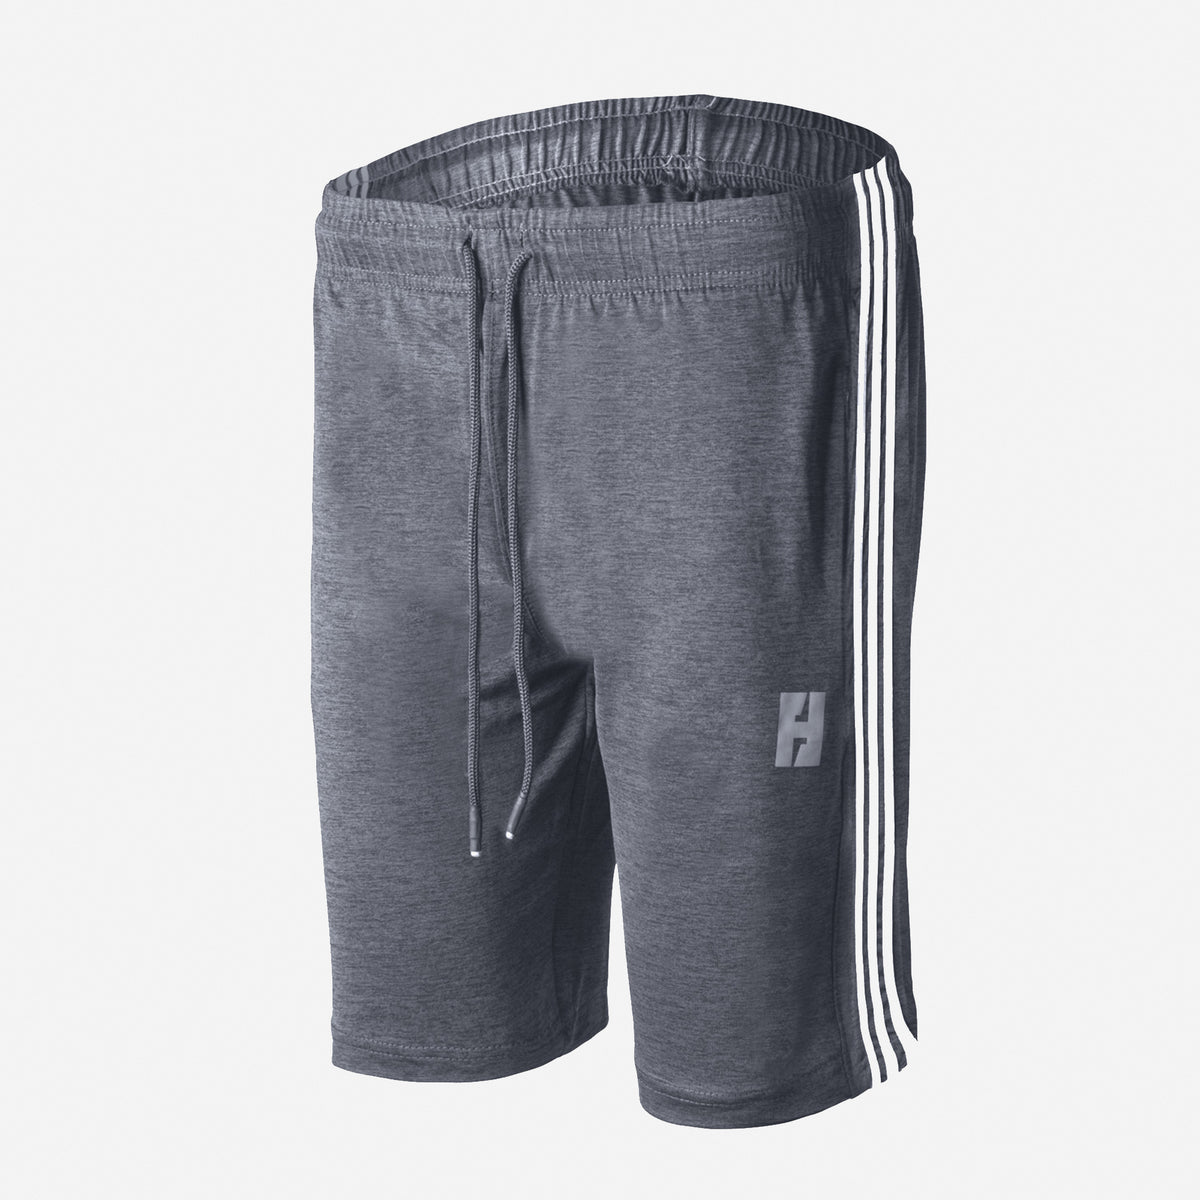 Sports Athletic Gym Outdoor Shorts With Secure Zipper Pocket Three Stripes